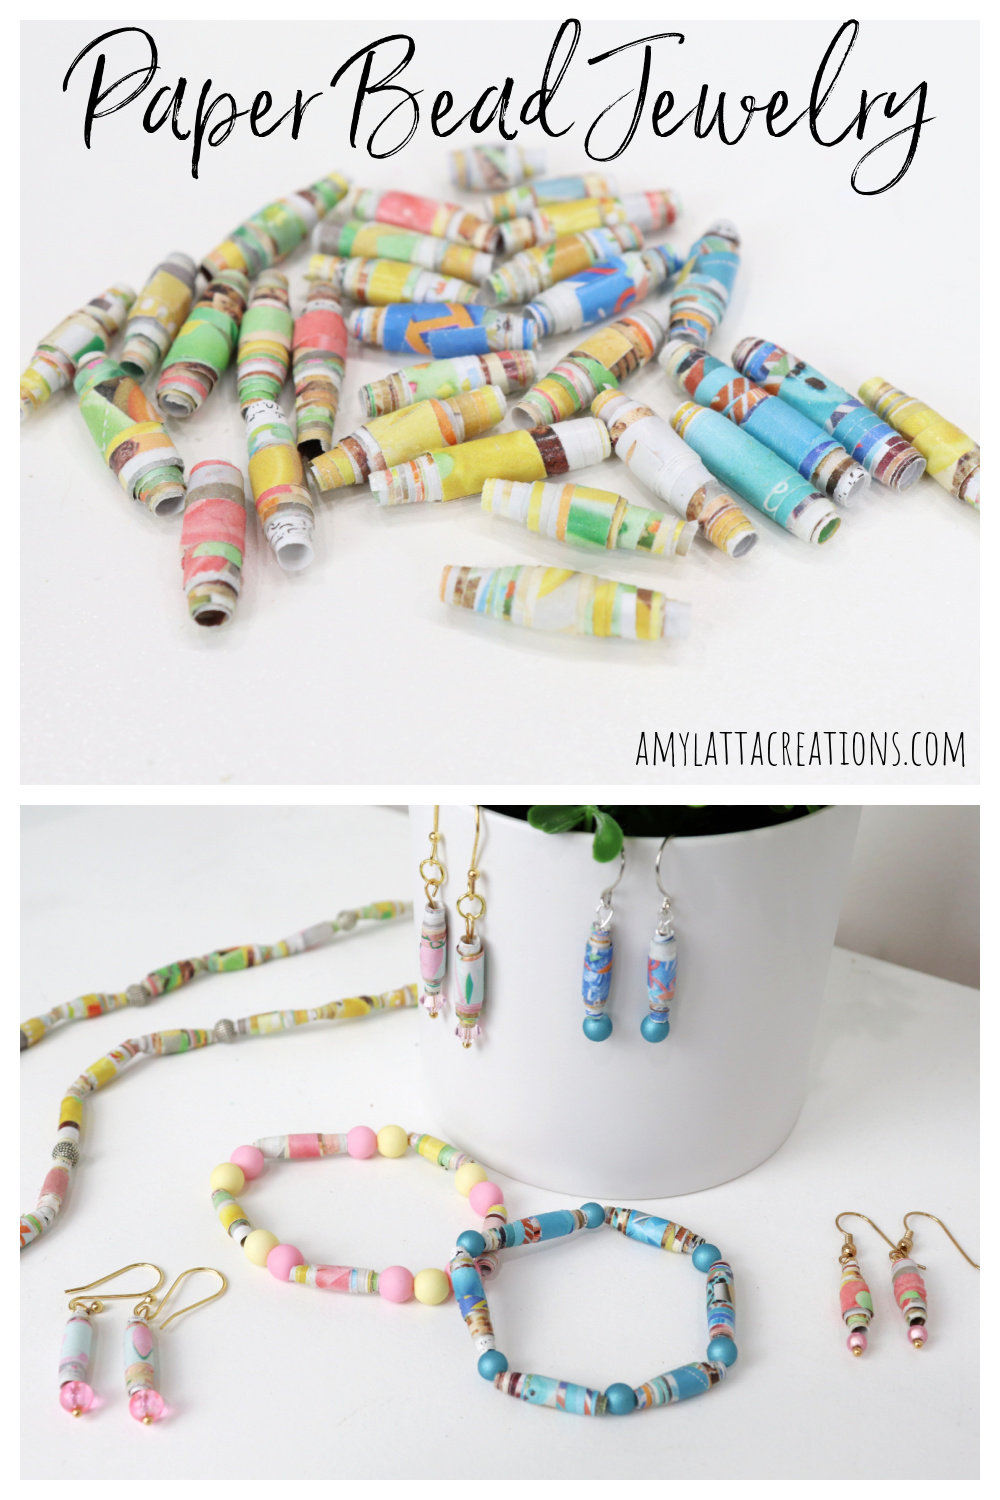 Image is a collage of rolled paper beads and jewelry made with paper beads.